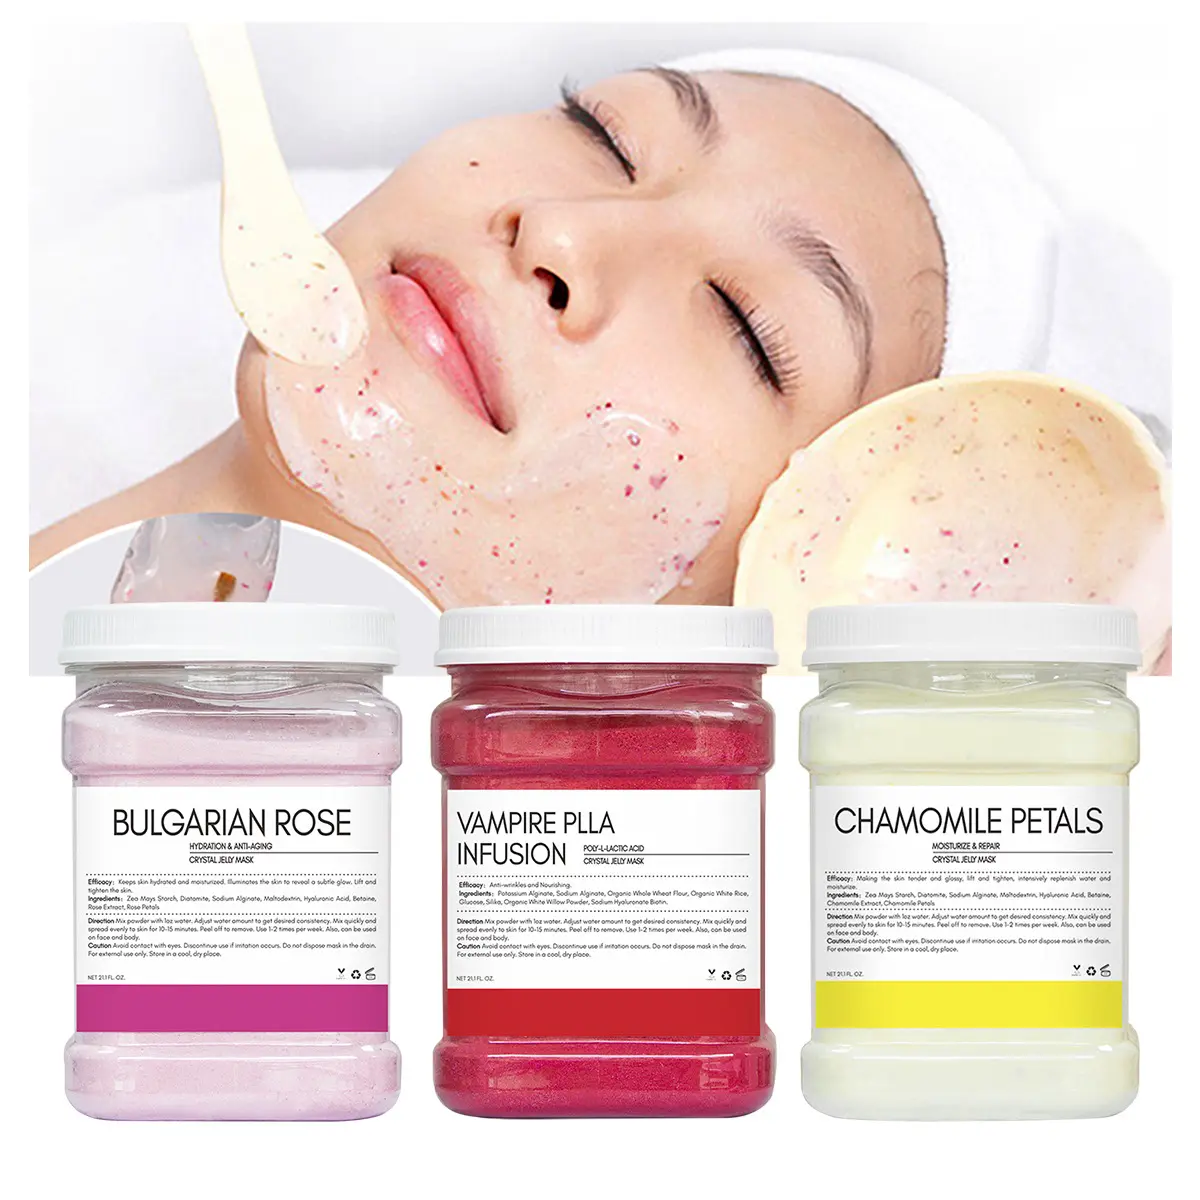 Low MOQ Custom Organic Natural Whitening Jellymask Beauty Products Facial Skin Care & Tools Face Crystal Hydro Jelly Mask Powder